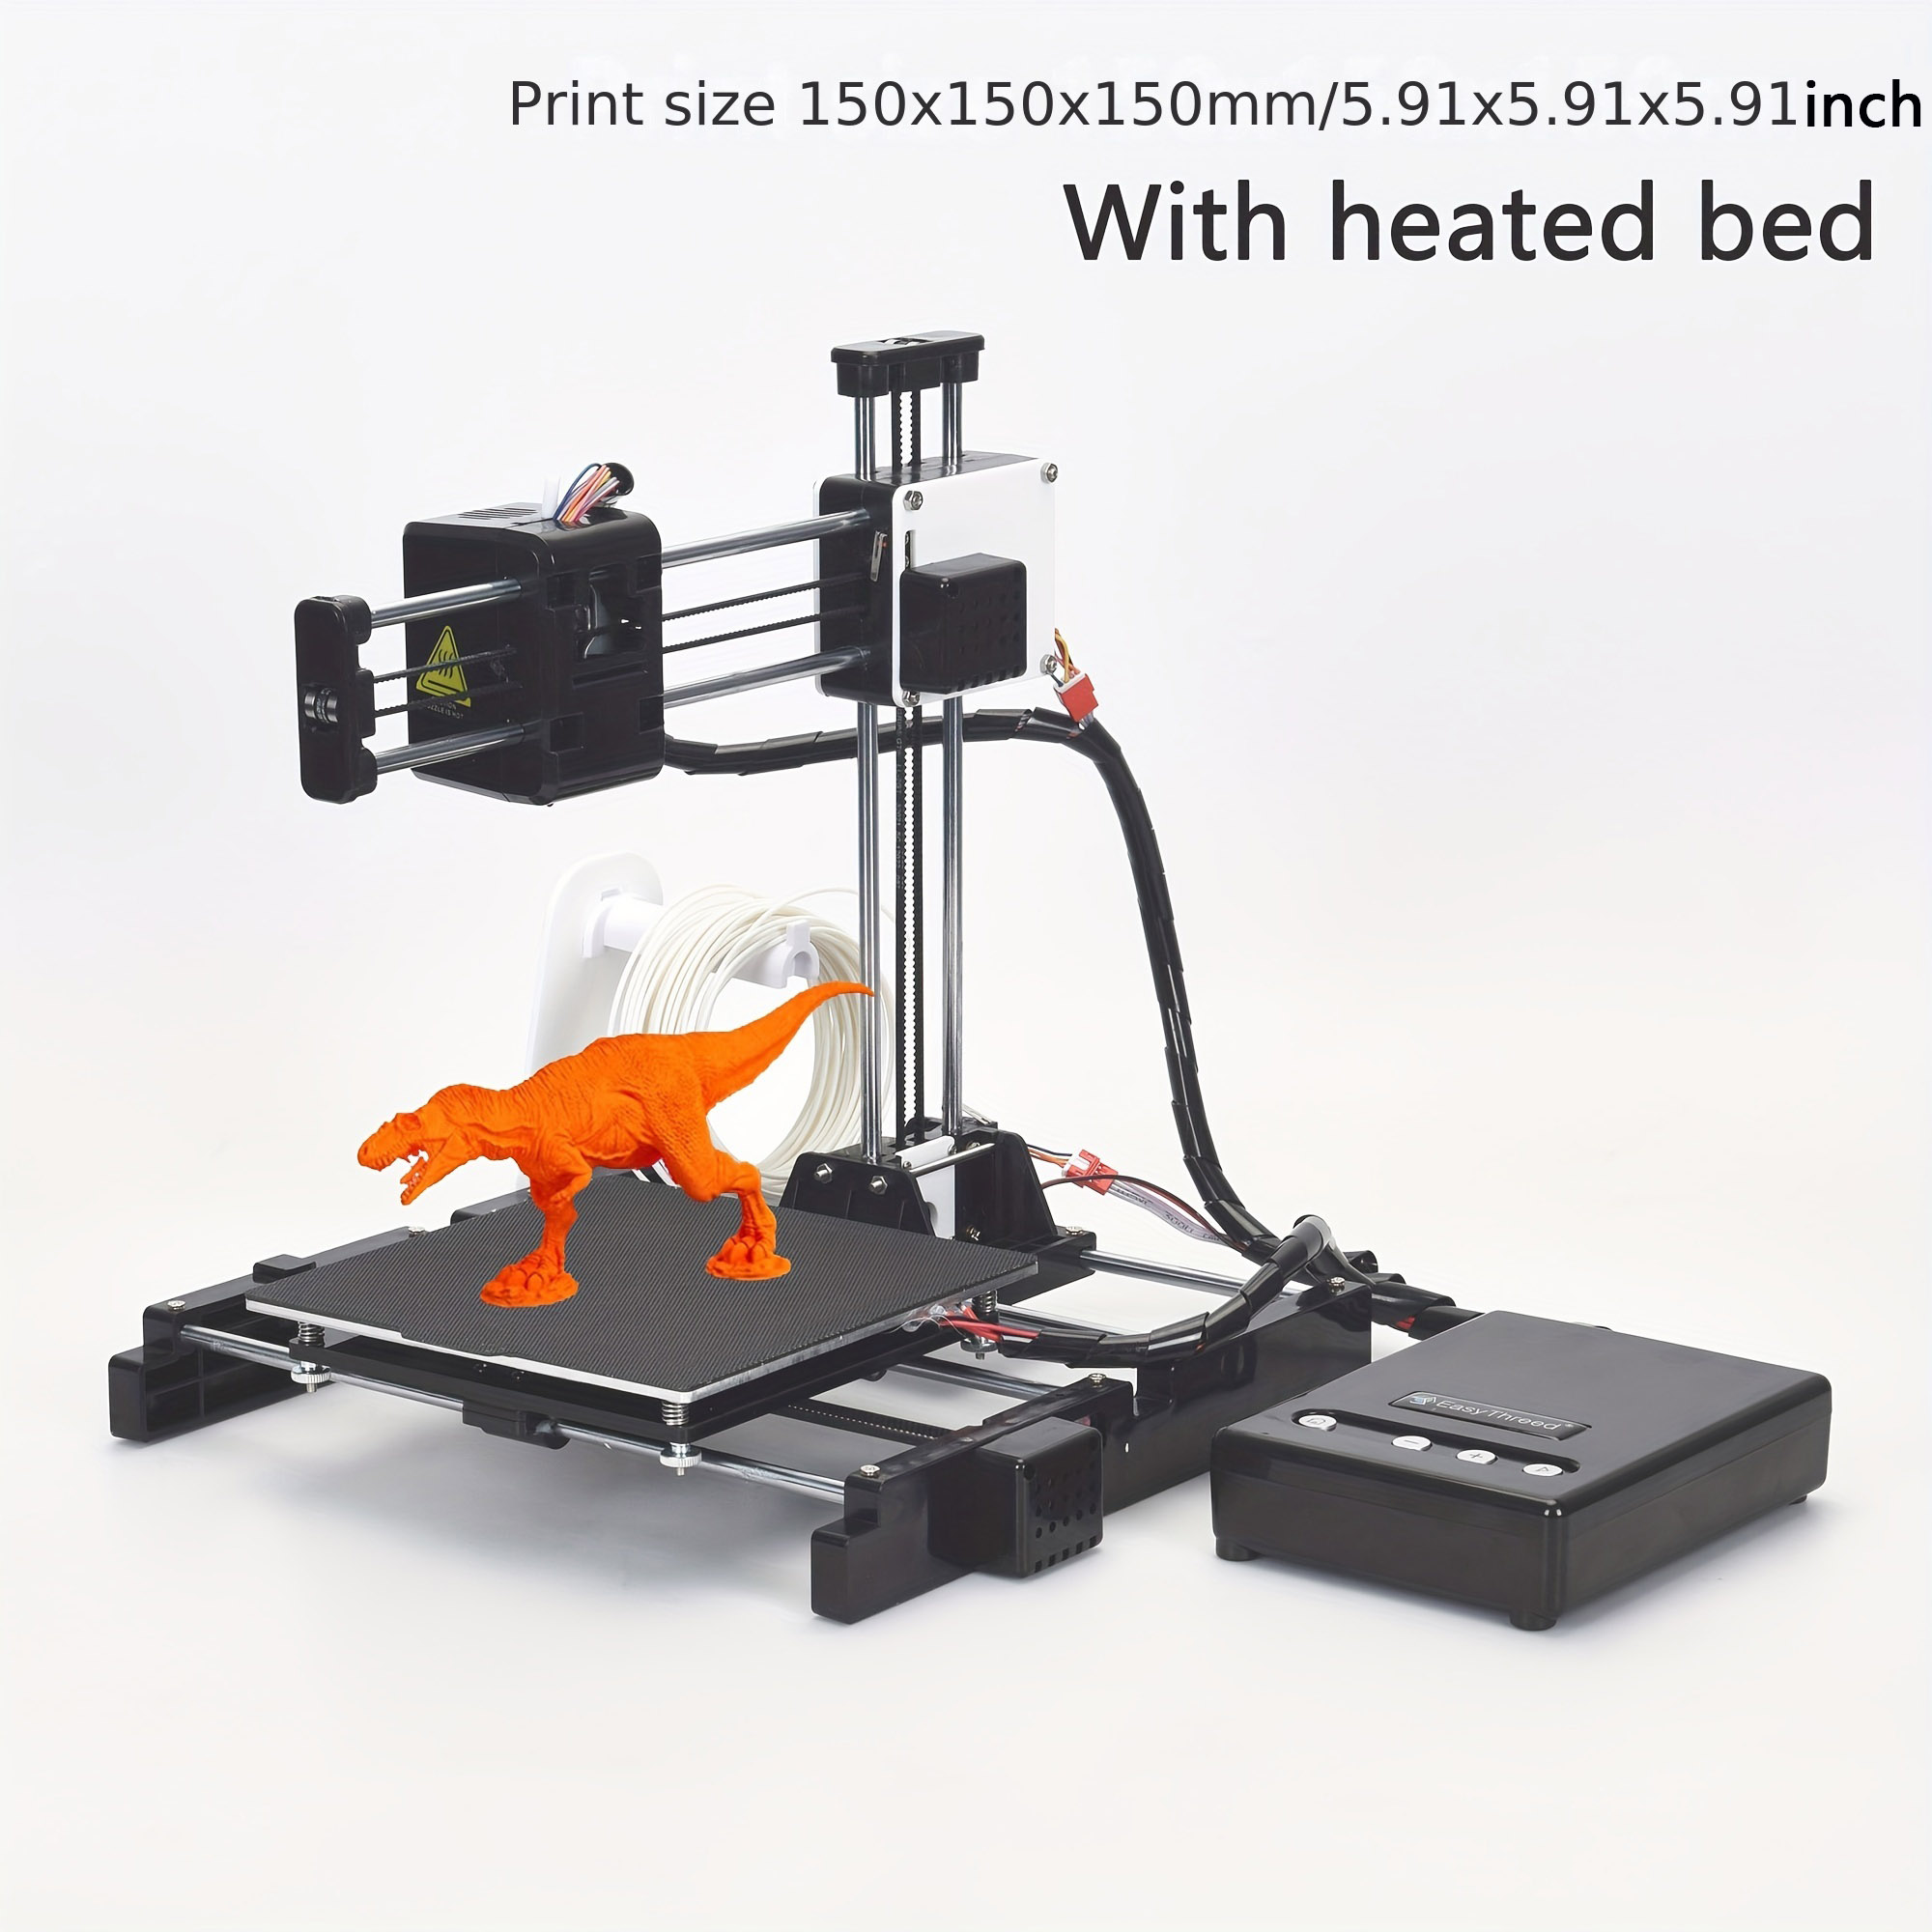 Easythreed X3  Mini 3D Printer for Household Education & Students 150*150*150mm Printing Size  with hotbed with 1.75mm 0.4mm Nozzle/CE Certificate